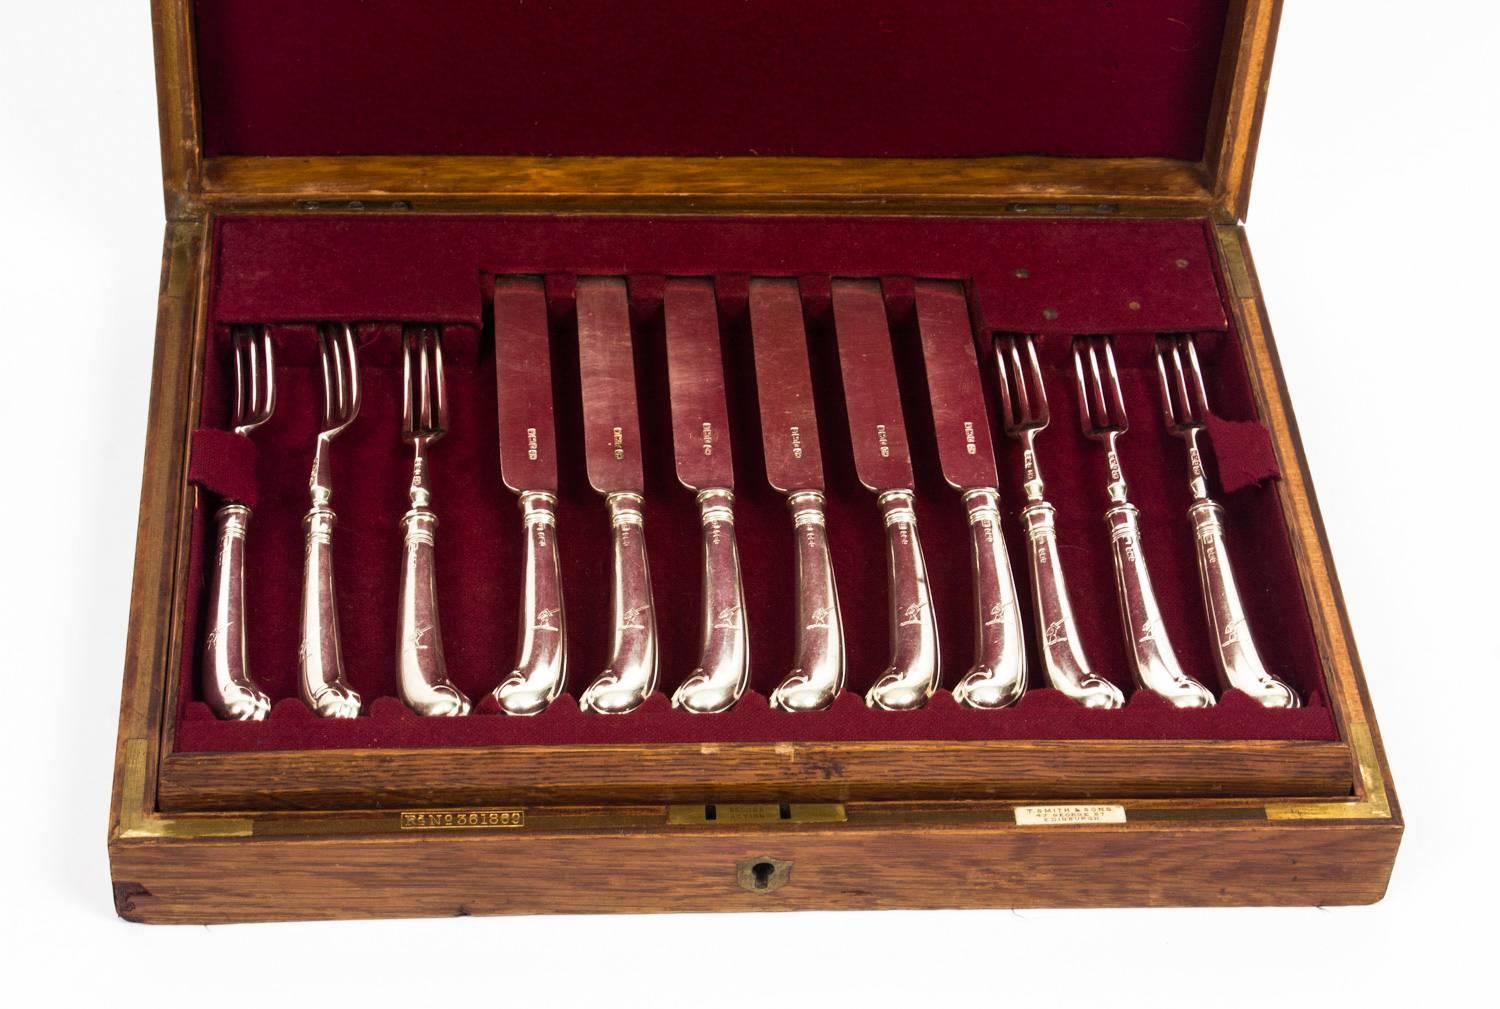 This is a beautiful antique and rare English walnut boxed set of 12 pairs of sterling silver fruit forks and knives, with hallmarks for Sheffield, 1905 and the makers mark of the renowned silversmith Harrison Brothers & George Howson.

All with